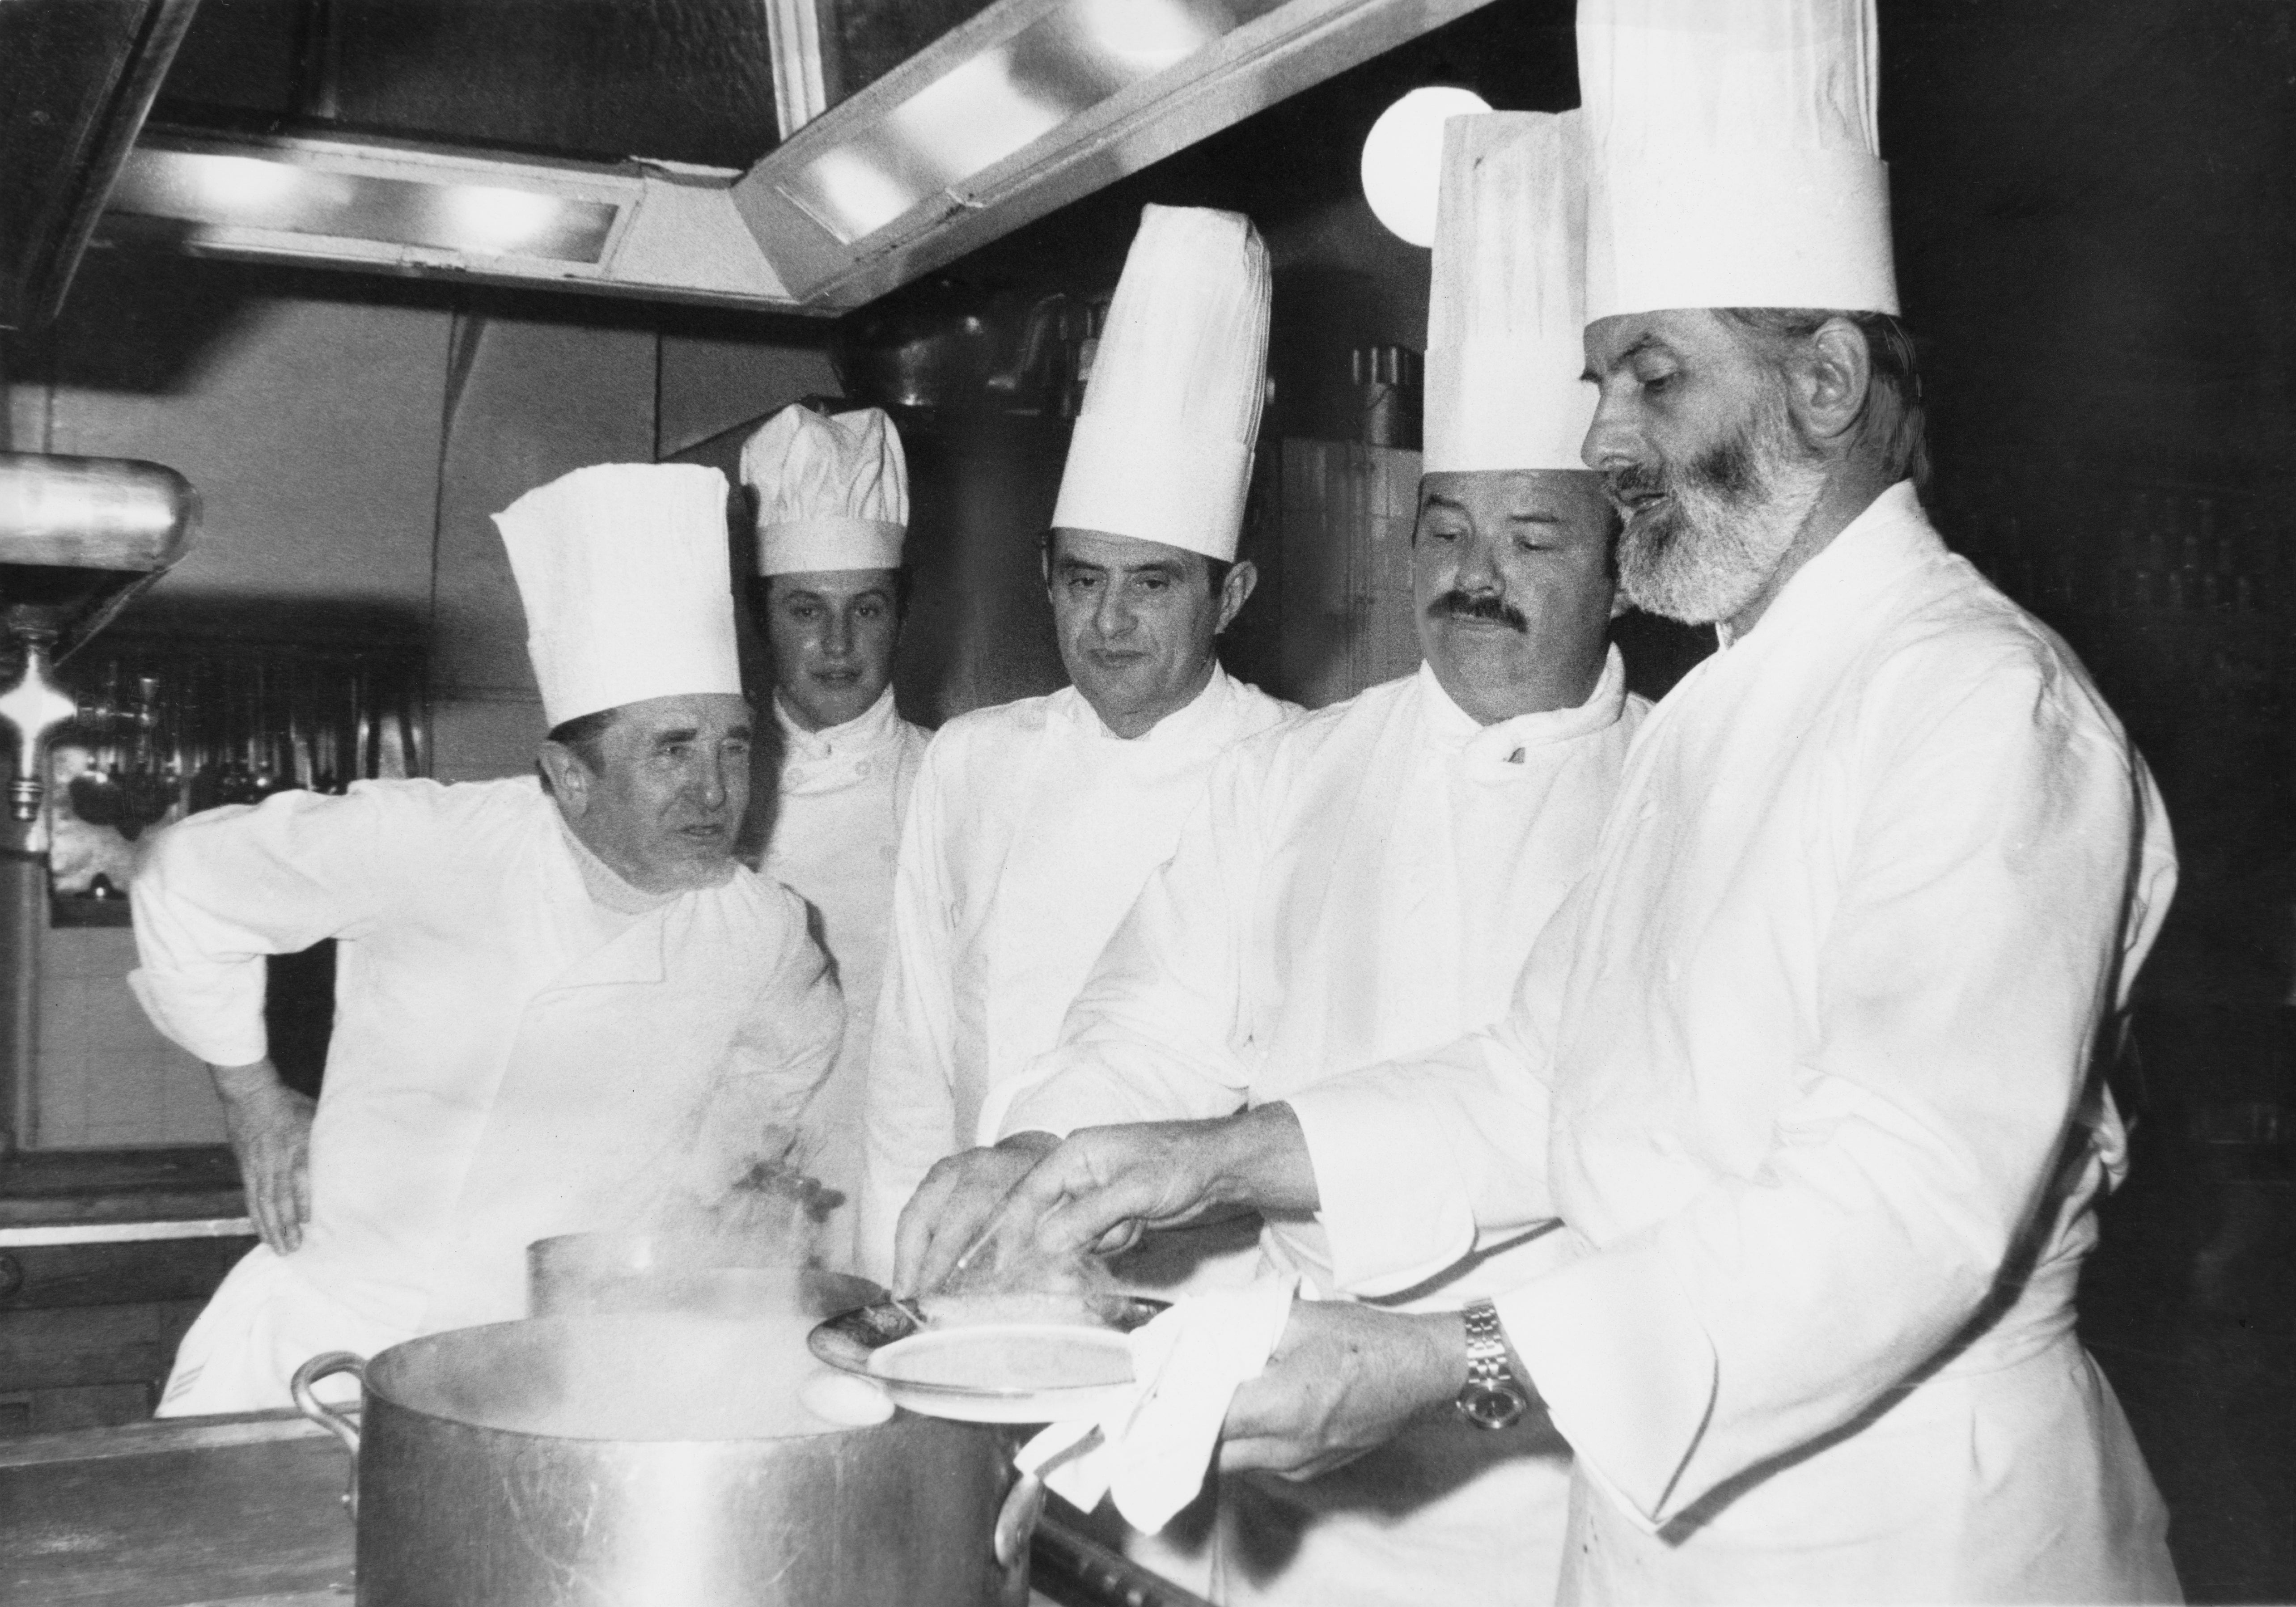 French chef Paul Bocuse (center) in the kitchens of the Elysee Palace, Paris, after being awarded the Legion of Honour by President Valery Giscard d’Estaing, on 25 February 1975. He is helping to prepare a presidential dinner with (left to right) Marcel Le Servot, Chef de cuisine at the Elysee Palace, Mathias Thery, Pierre Troisgros, and Jean Troisgros